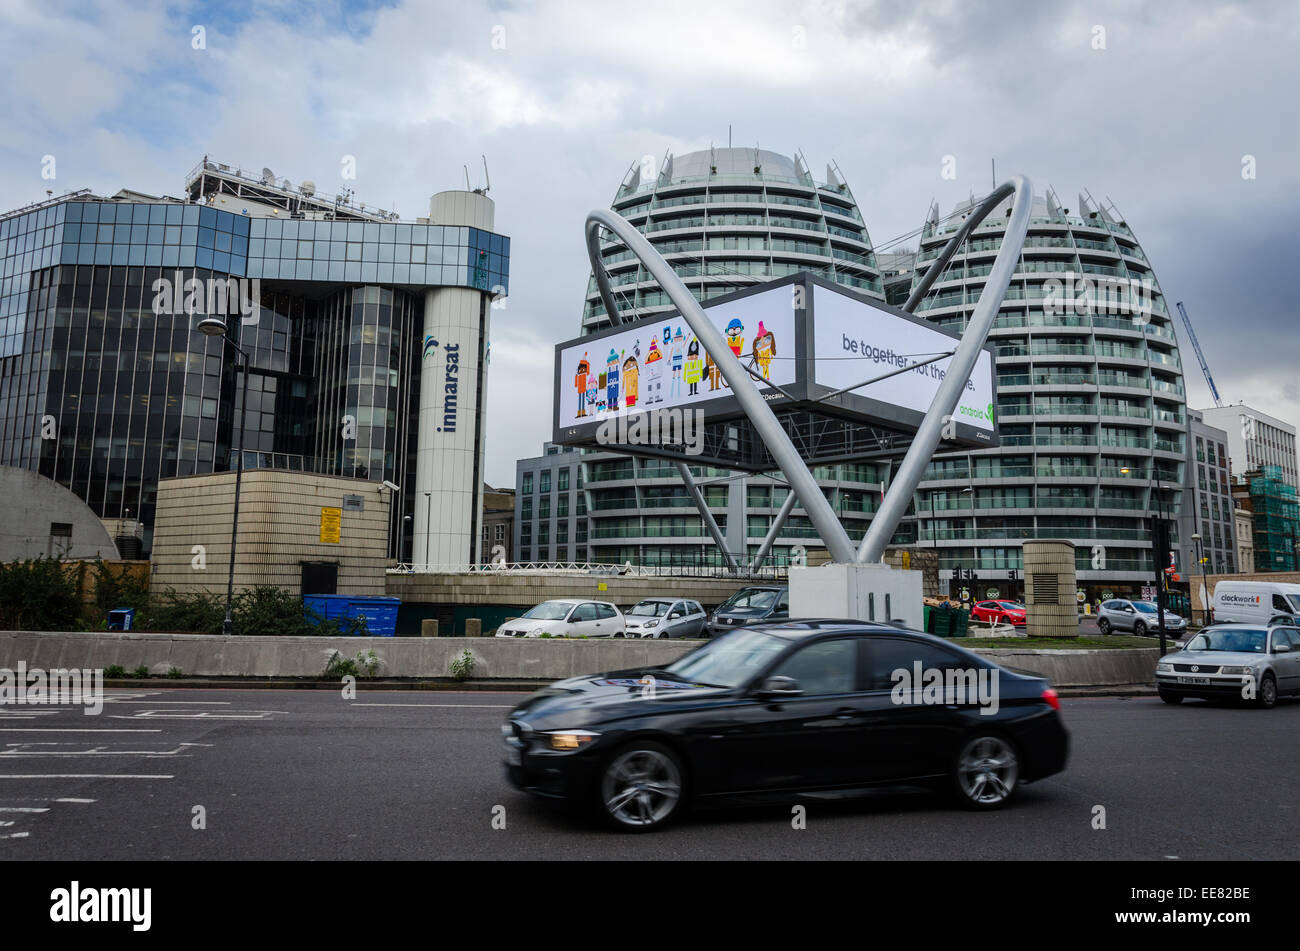 Old Street roundabout, referred to as Silicon Roundabout and Tech City due to the volume of technology businesses. London, UK Stock Photo